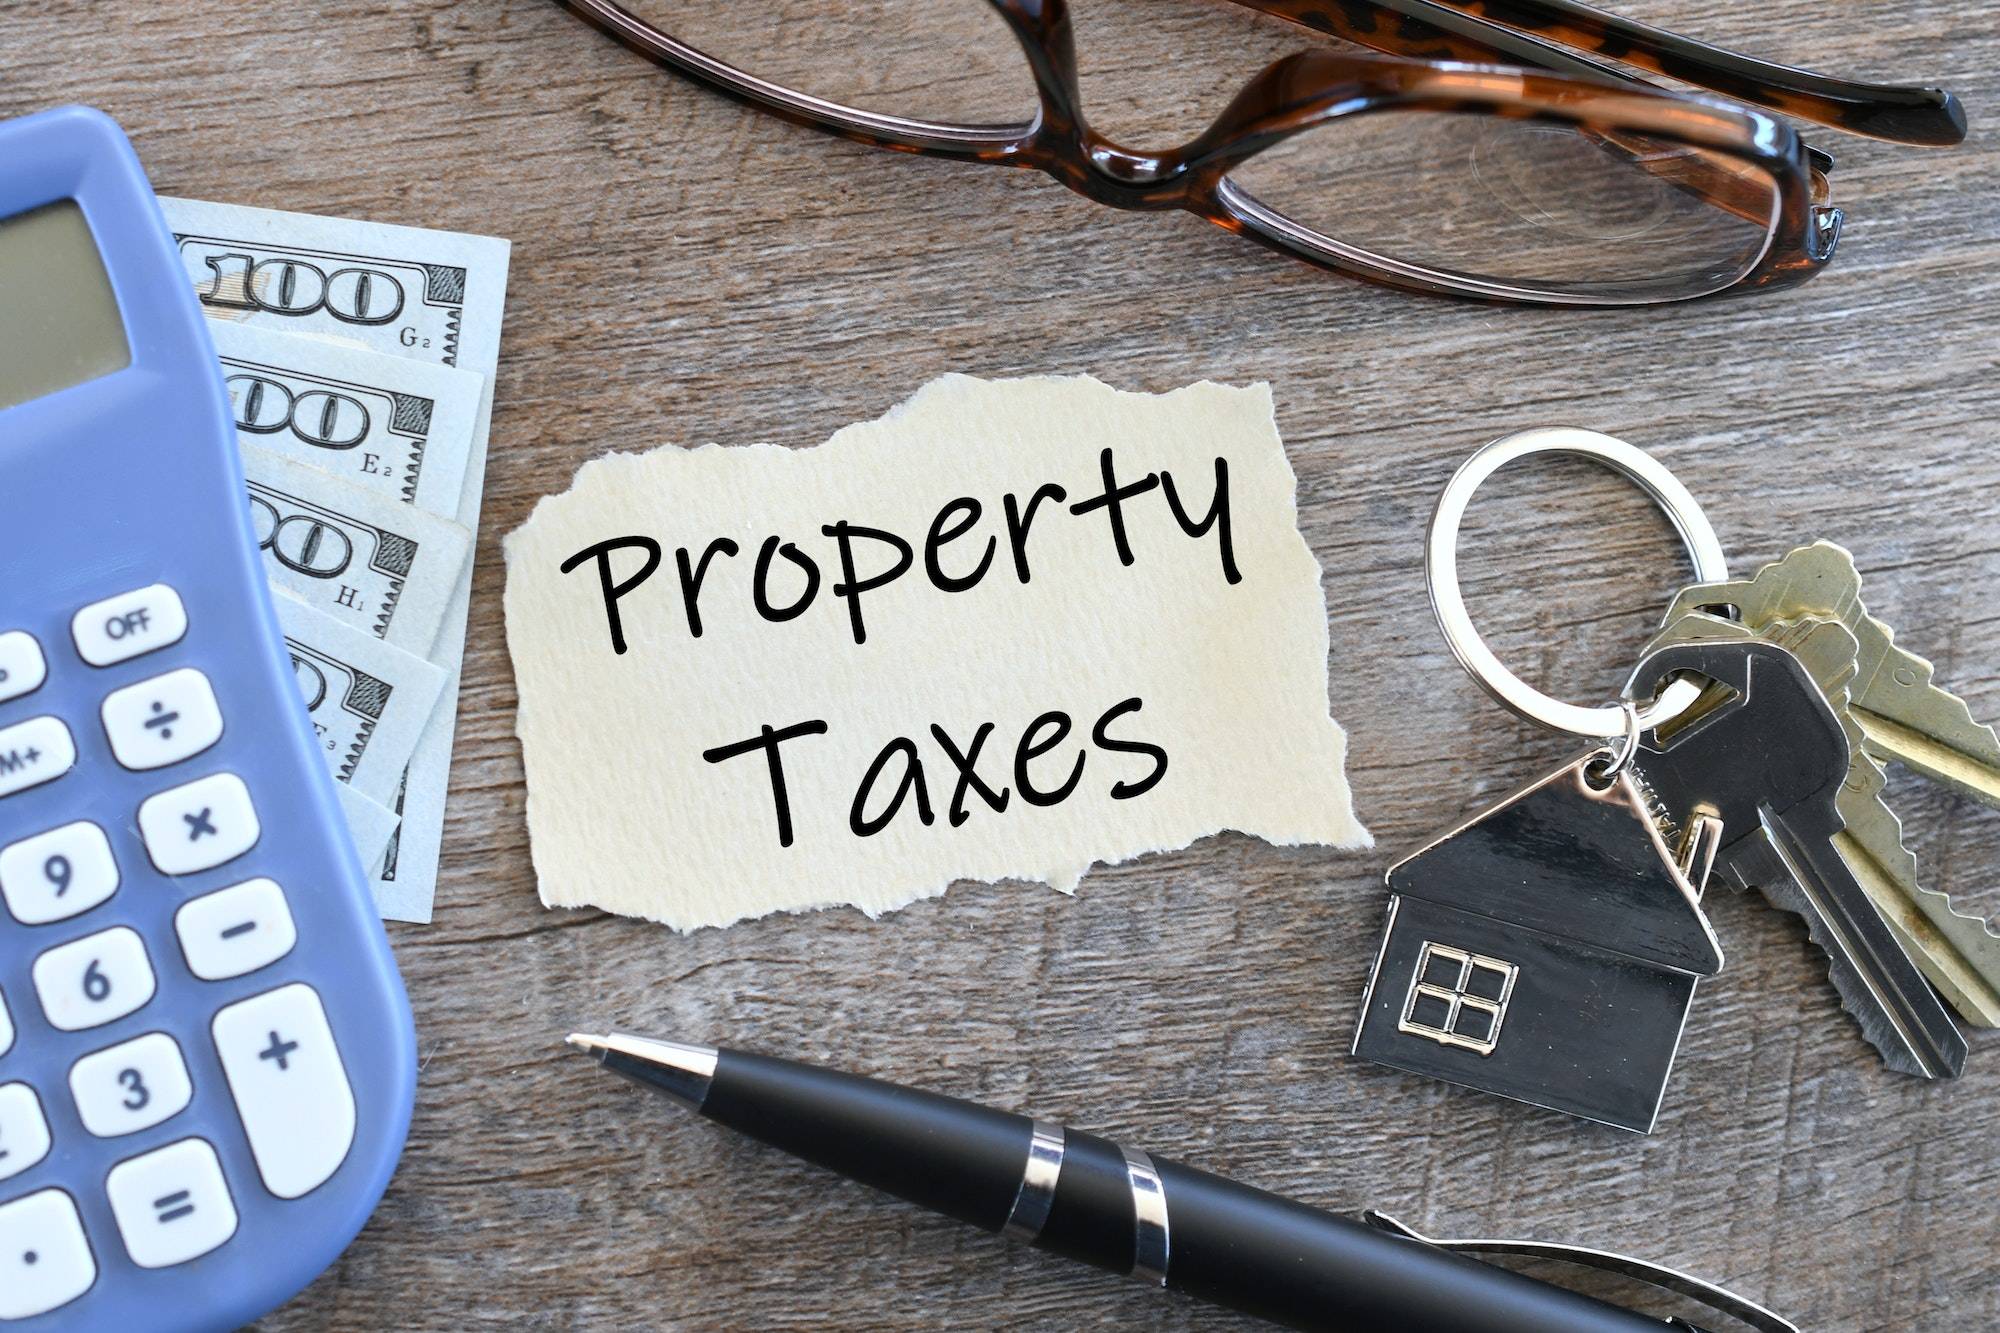 How much does an ADU increase property taxes in California?